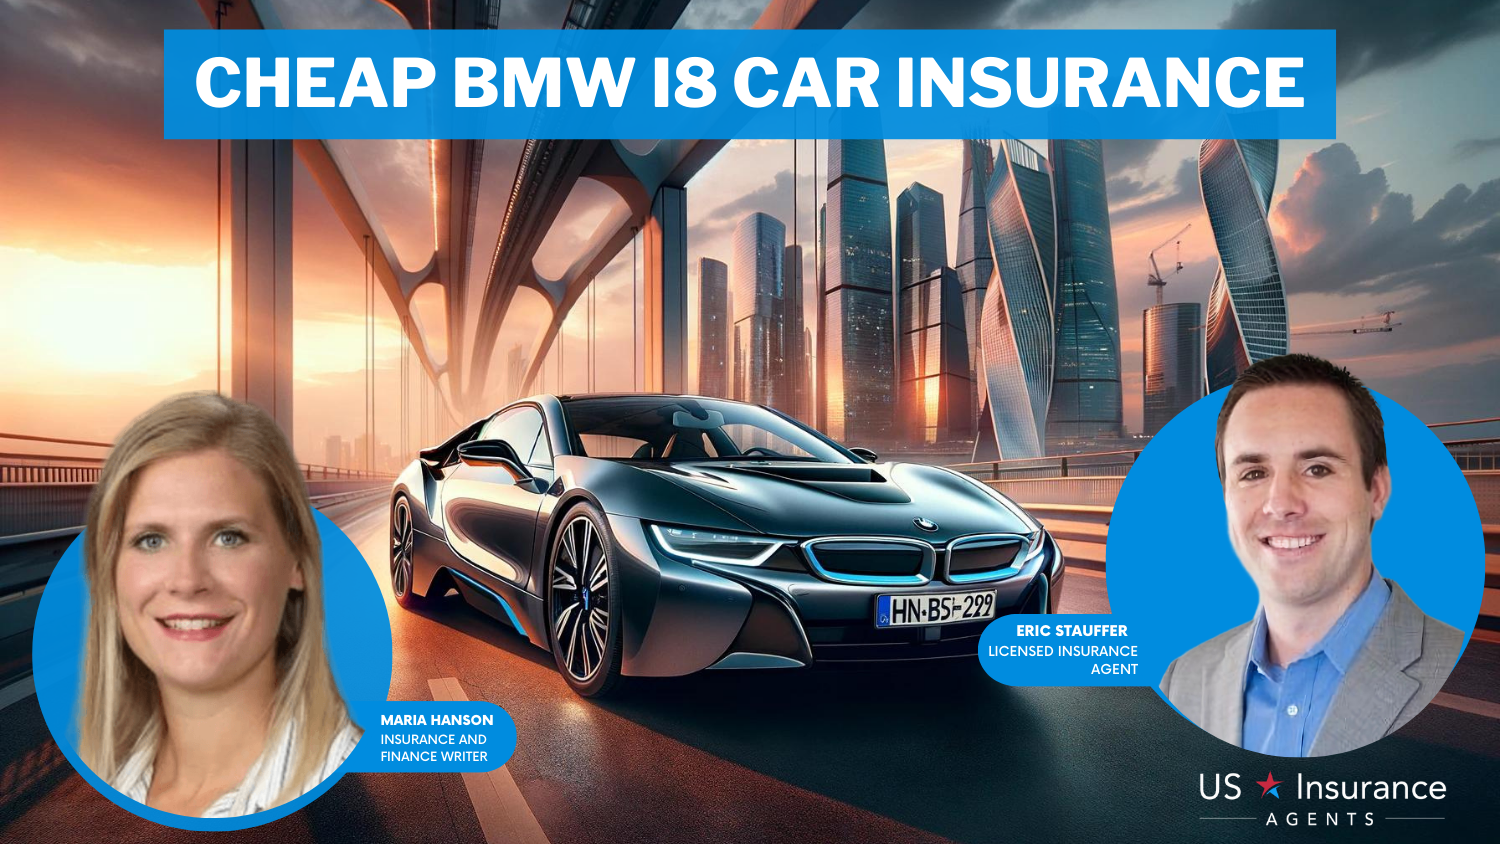 Cheap BMW I8 Car Insurance: Travelers, USAA, and Farmers